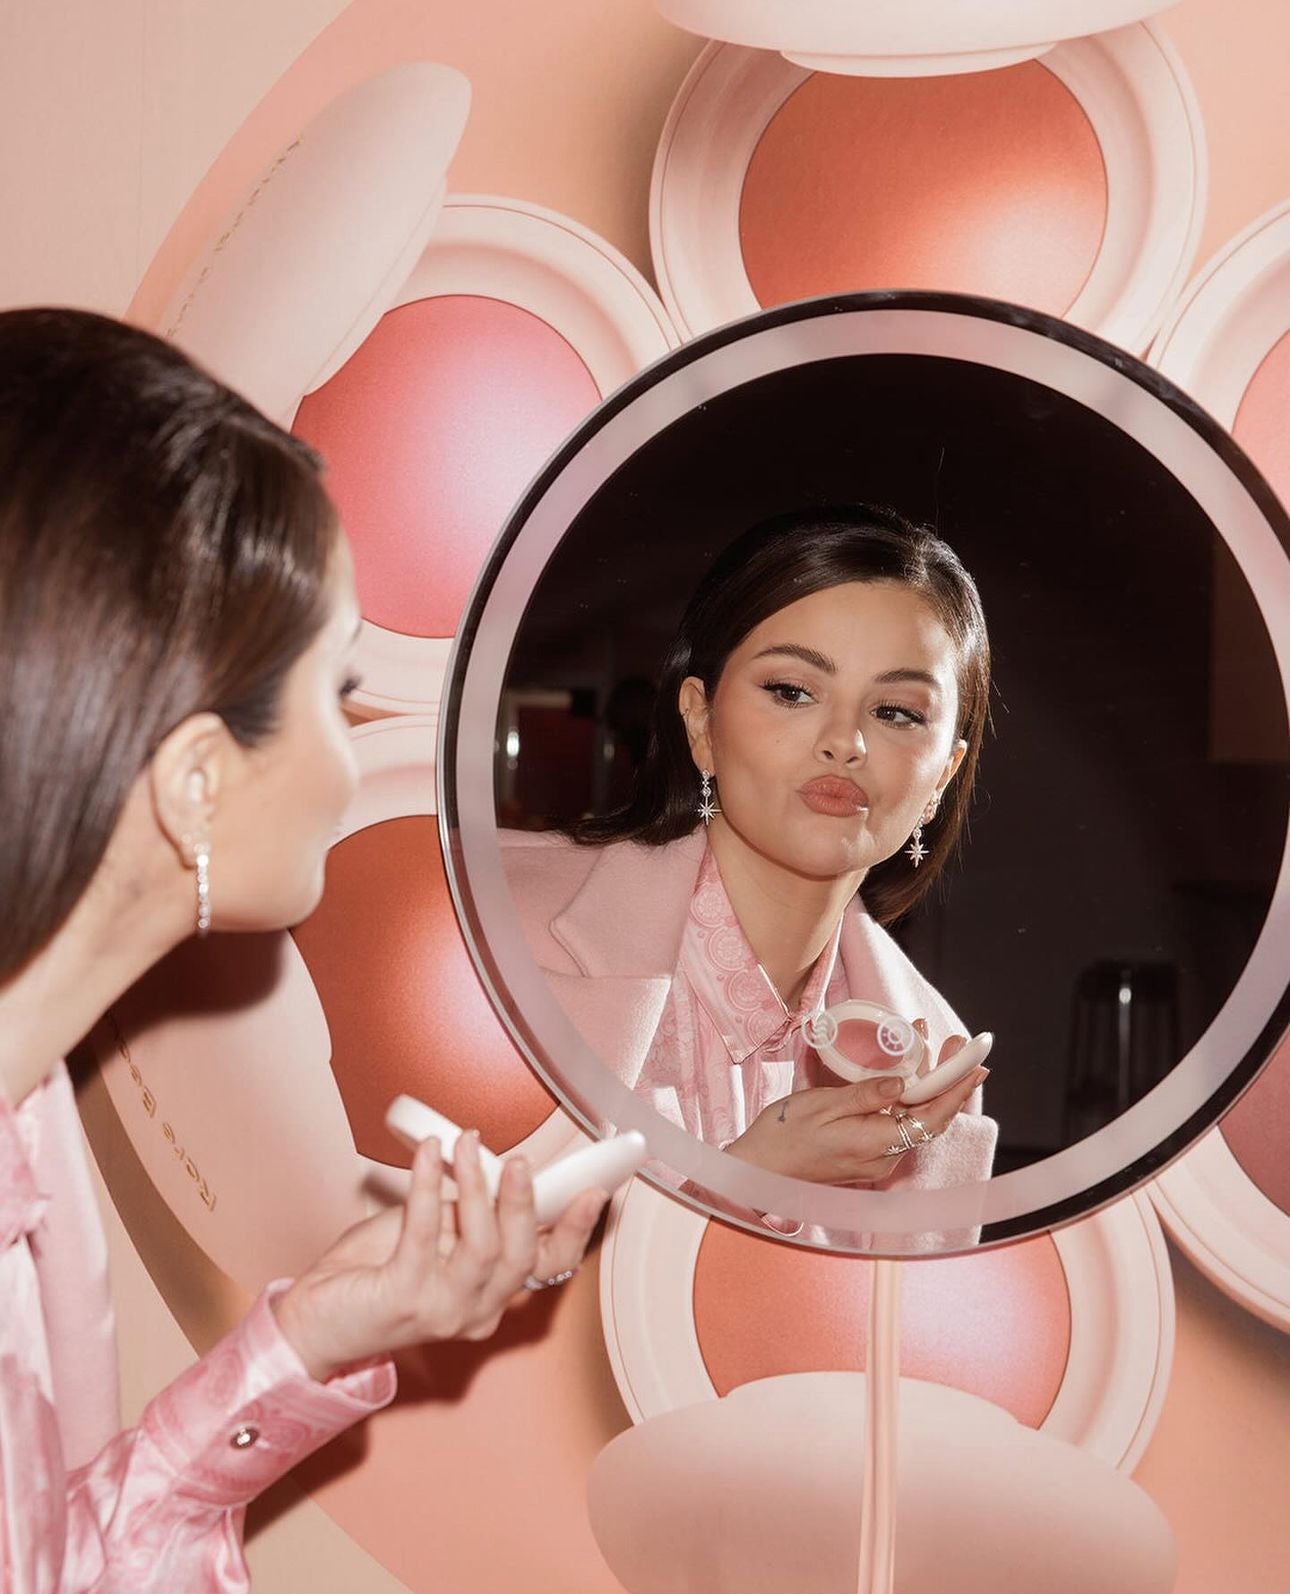 Business Lessons from Rare Beauty by Selena Gomez ft. Their NEW Leaping Bunny Certification